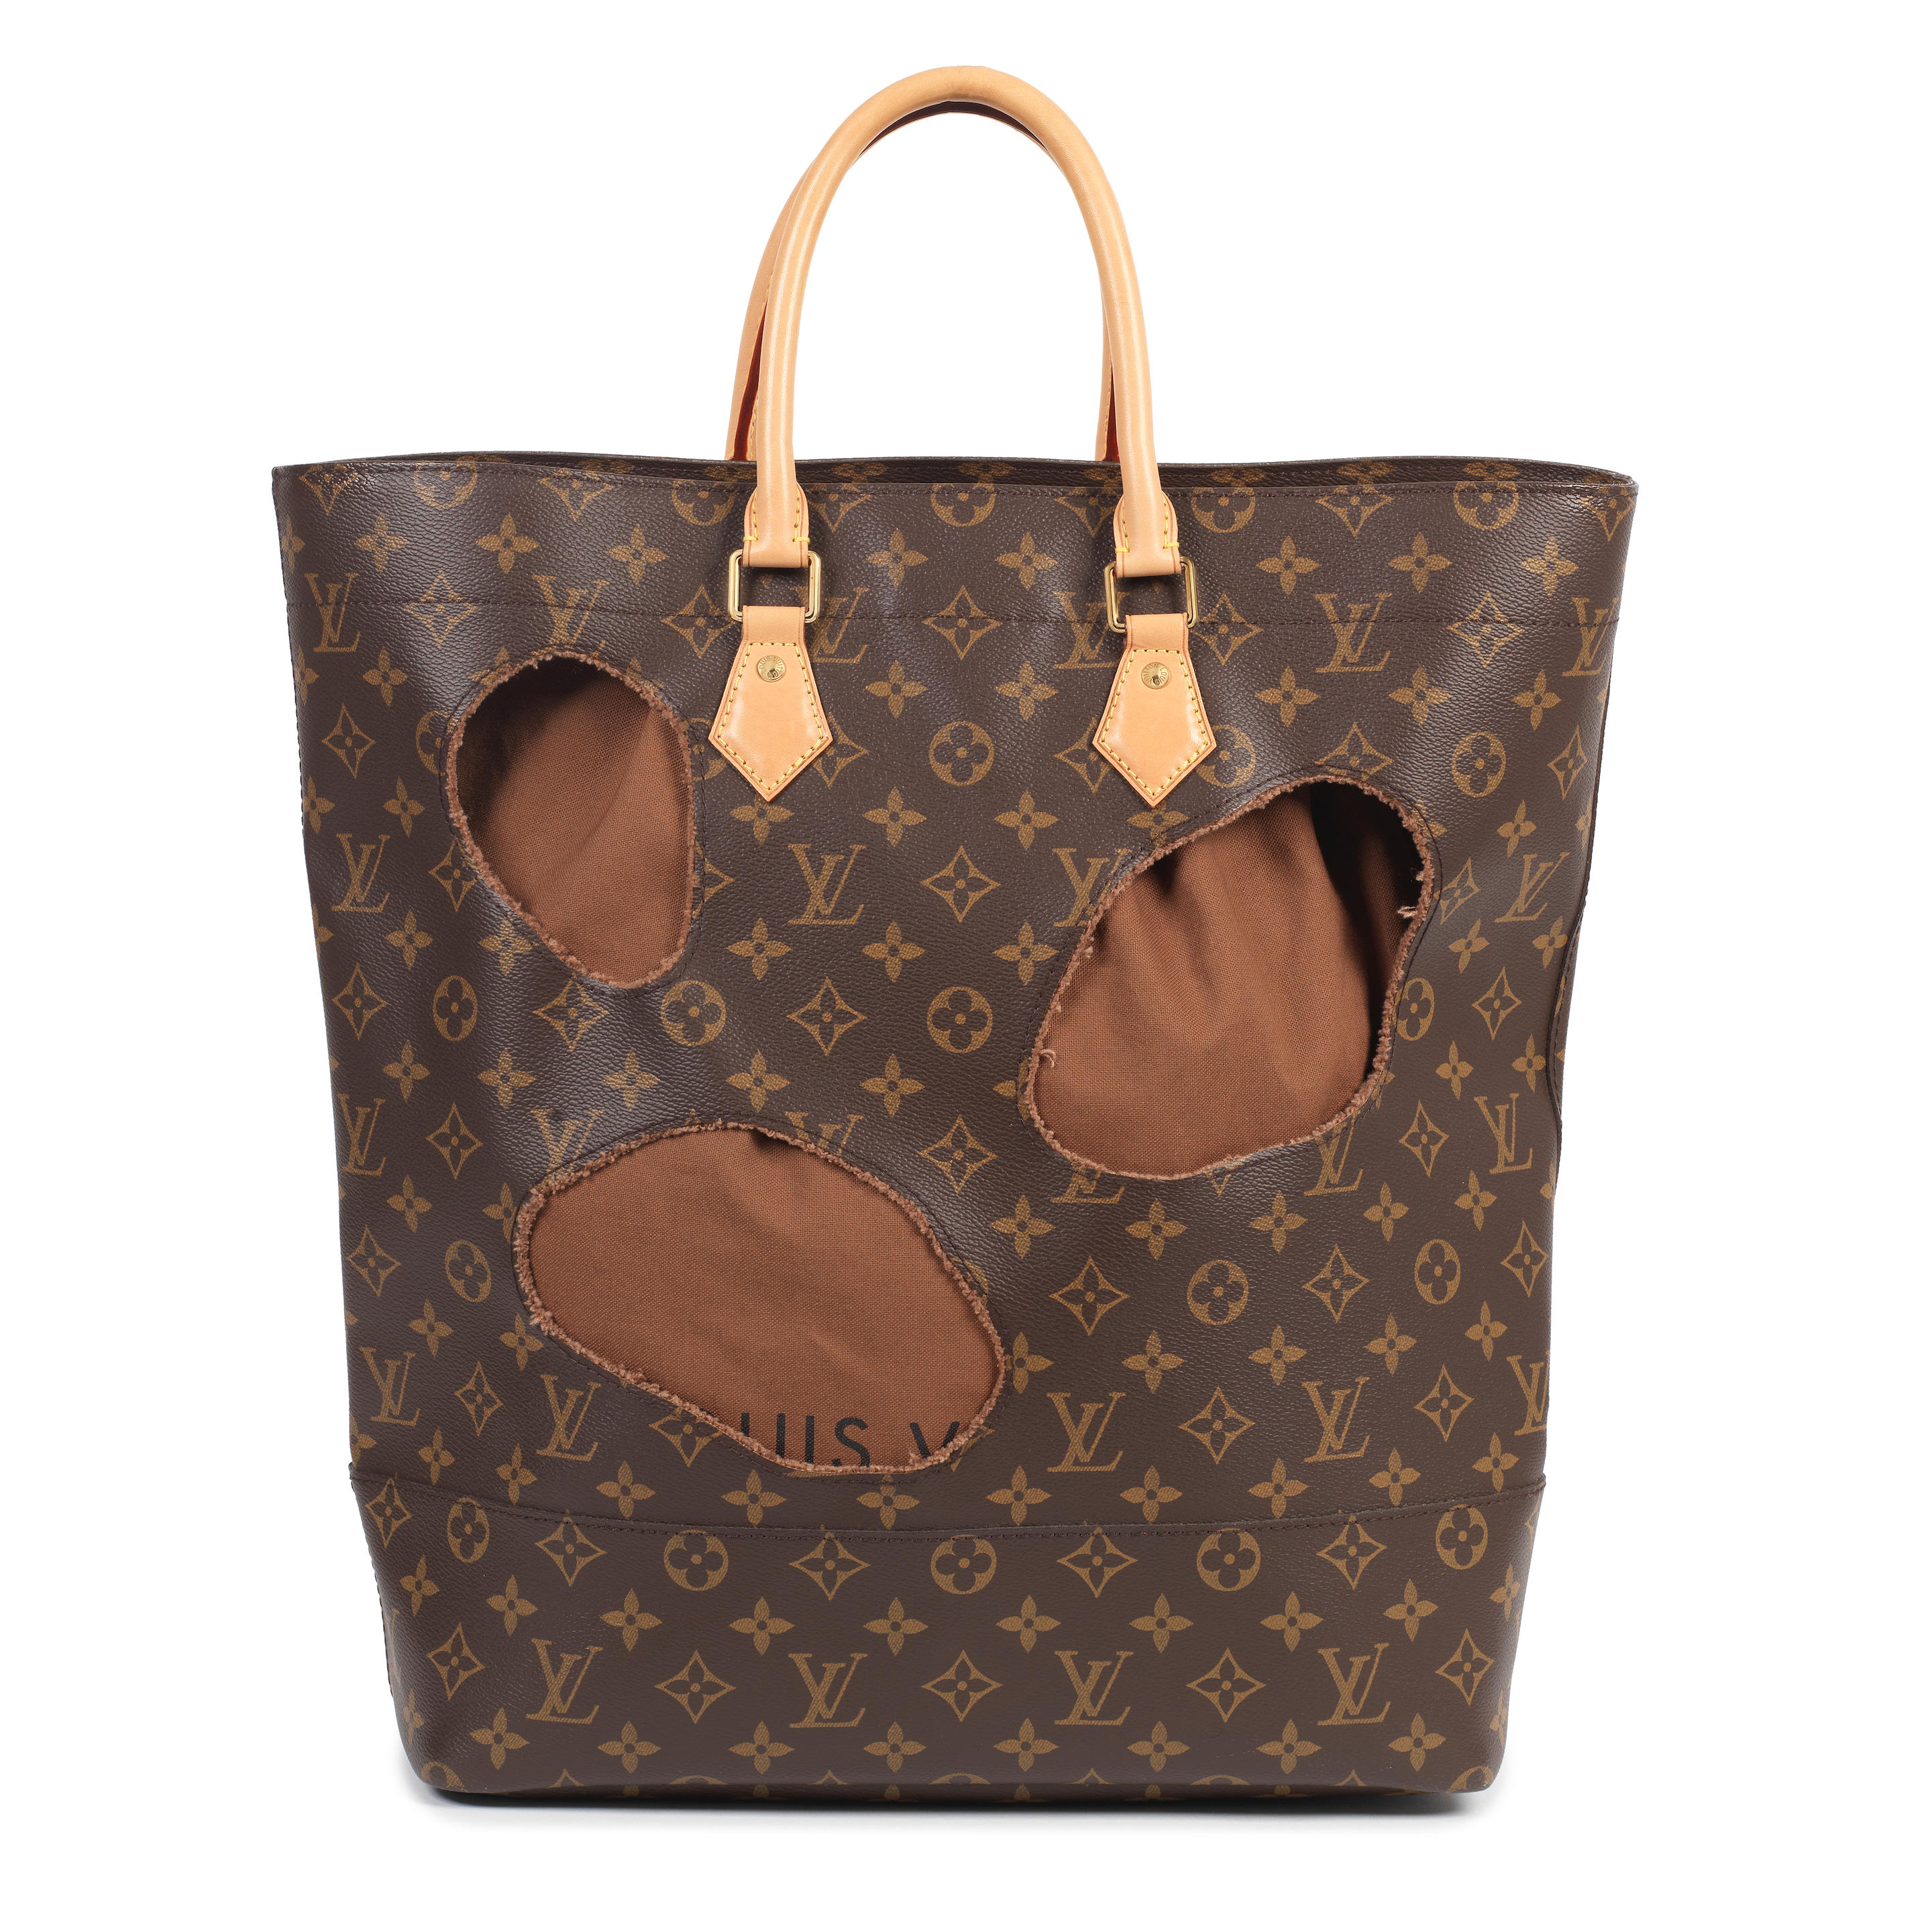 Sold at Auction: Louis Vuitton Rei Kawakubo Bag With Holes